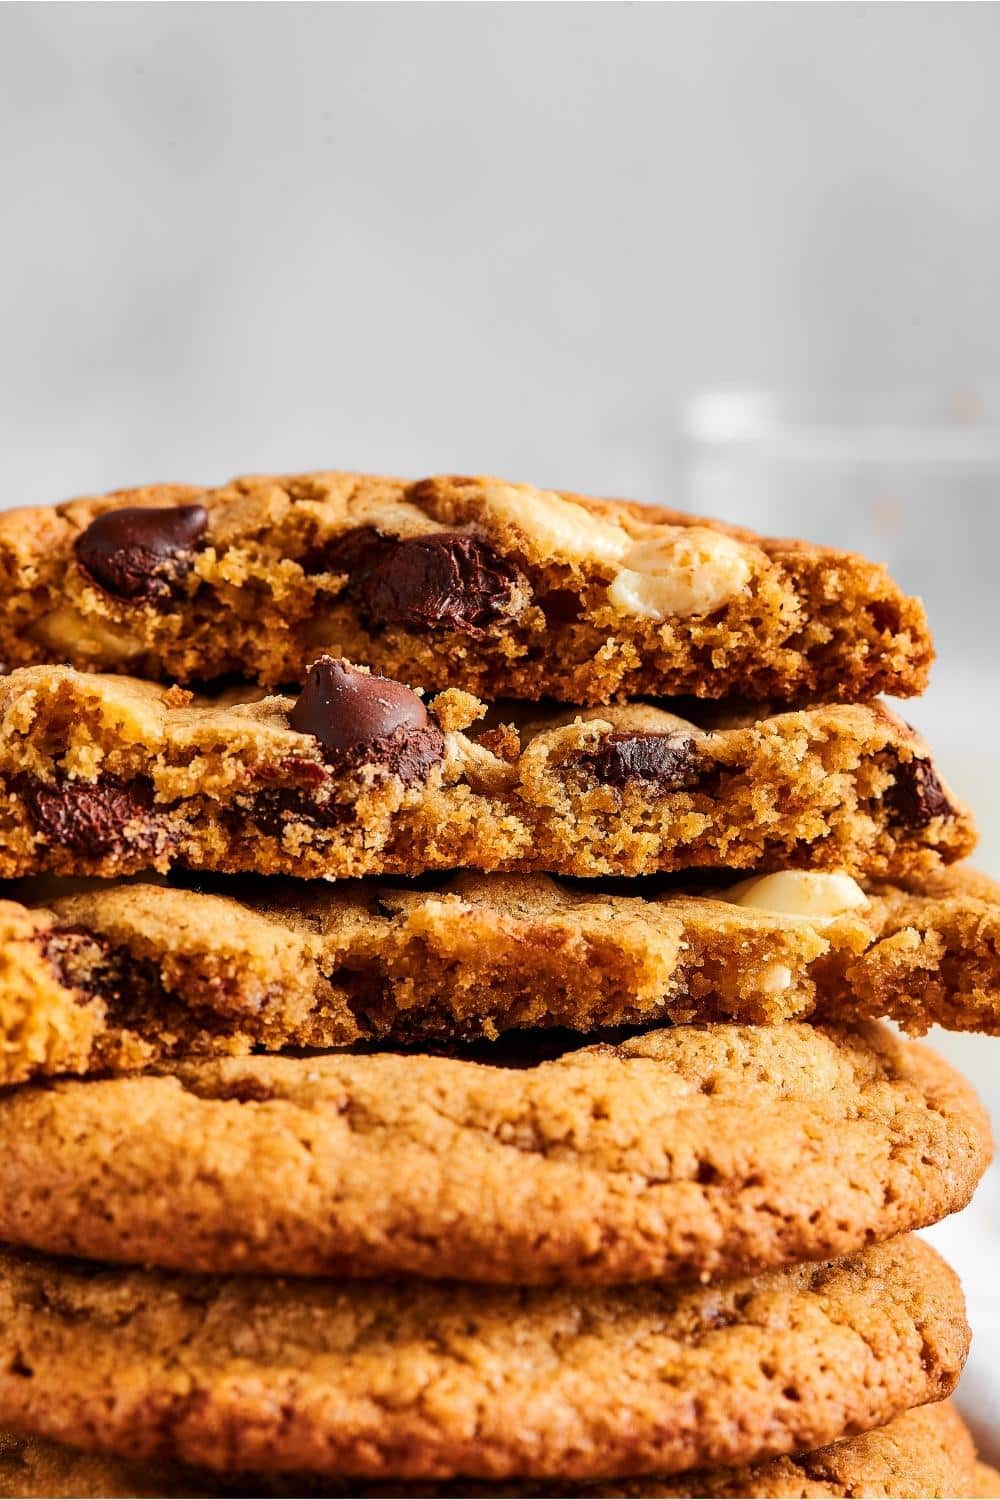 Part of two whole chocolate chip cookies with part of three chocolate chip cookies stacked on top of them. A bite is taken out of the front of the top three cookies.